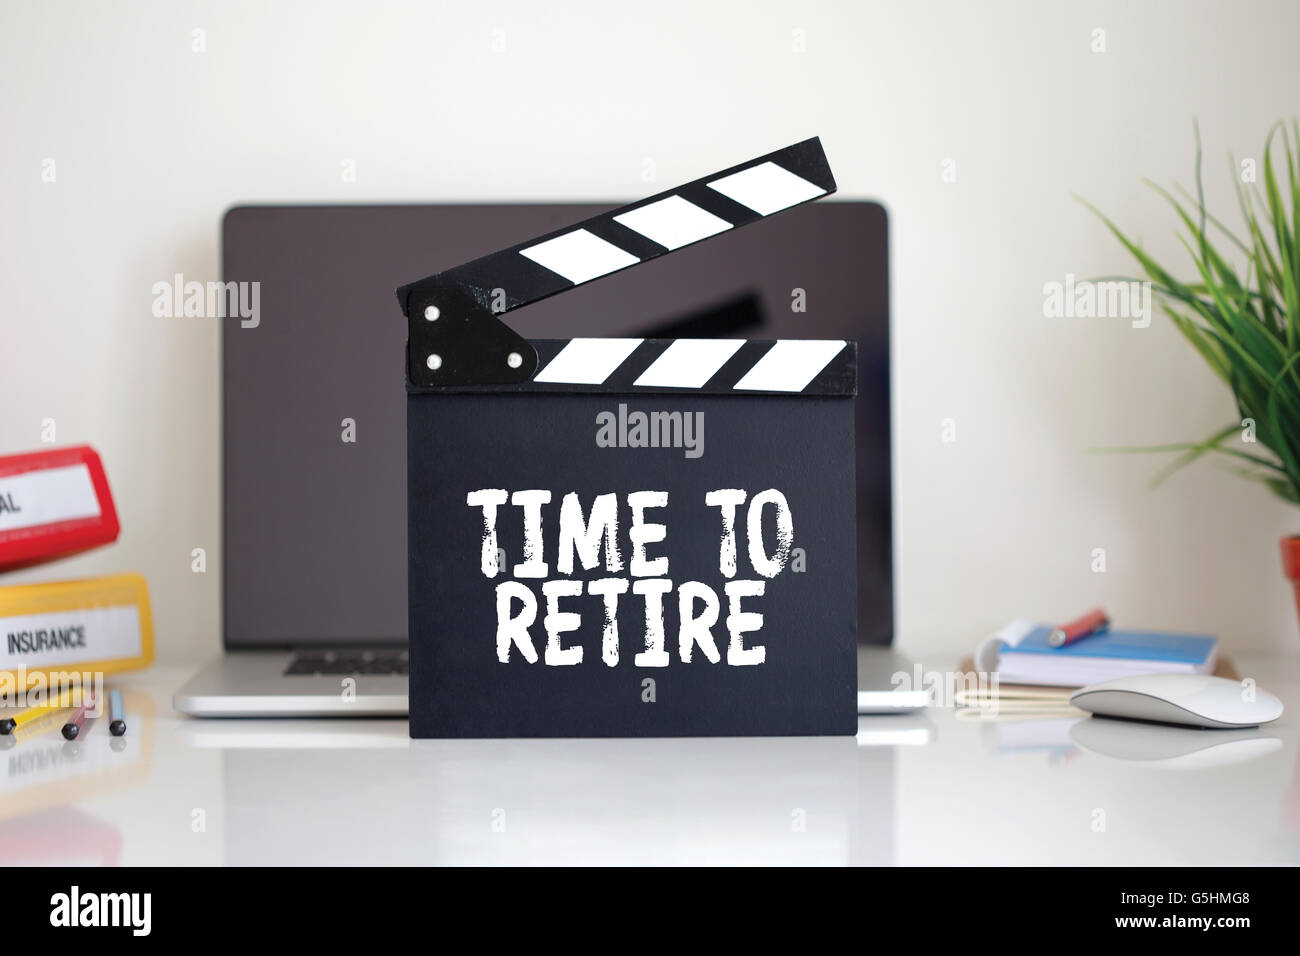 Cinema Clapper with Time To Retire word Stock Photo